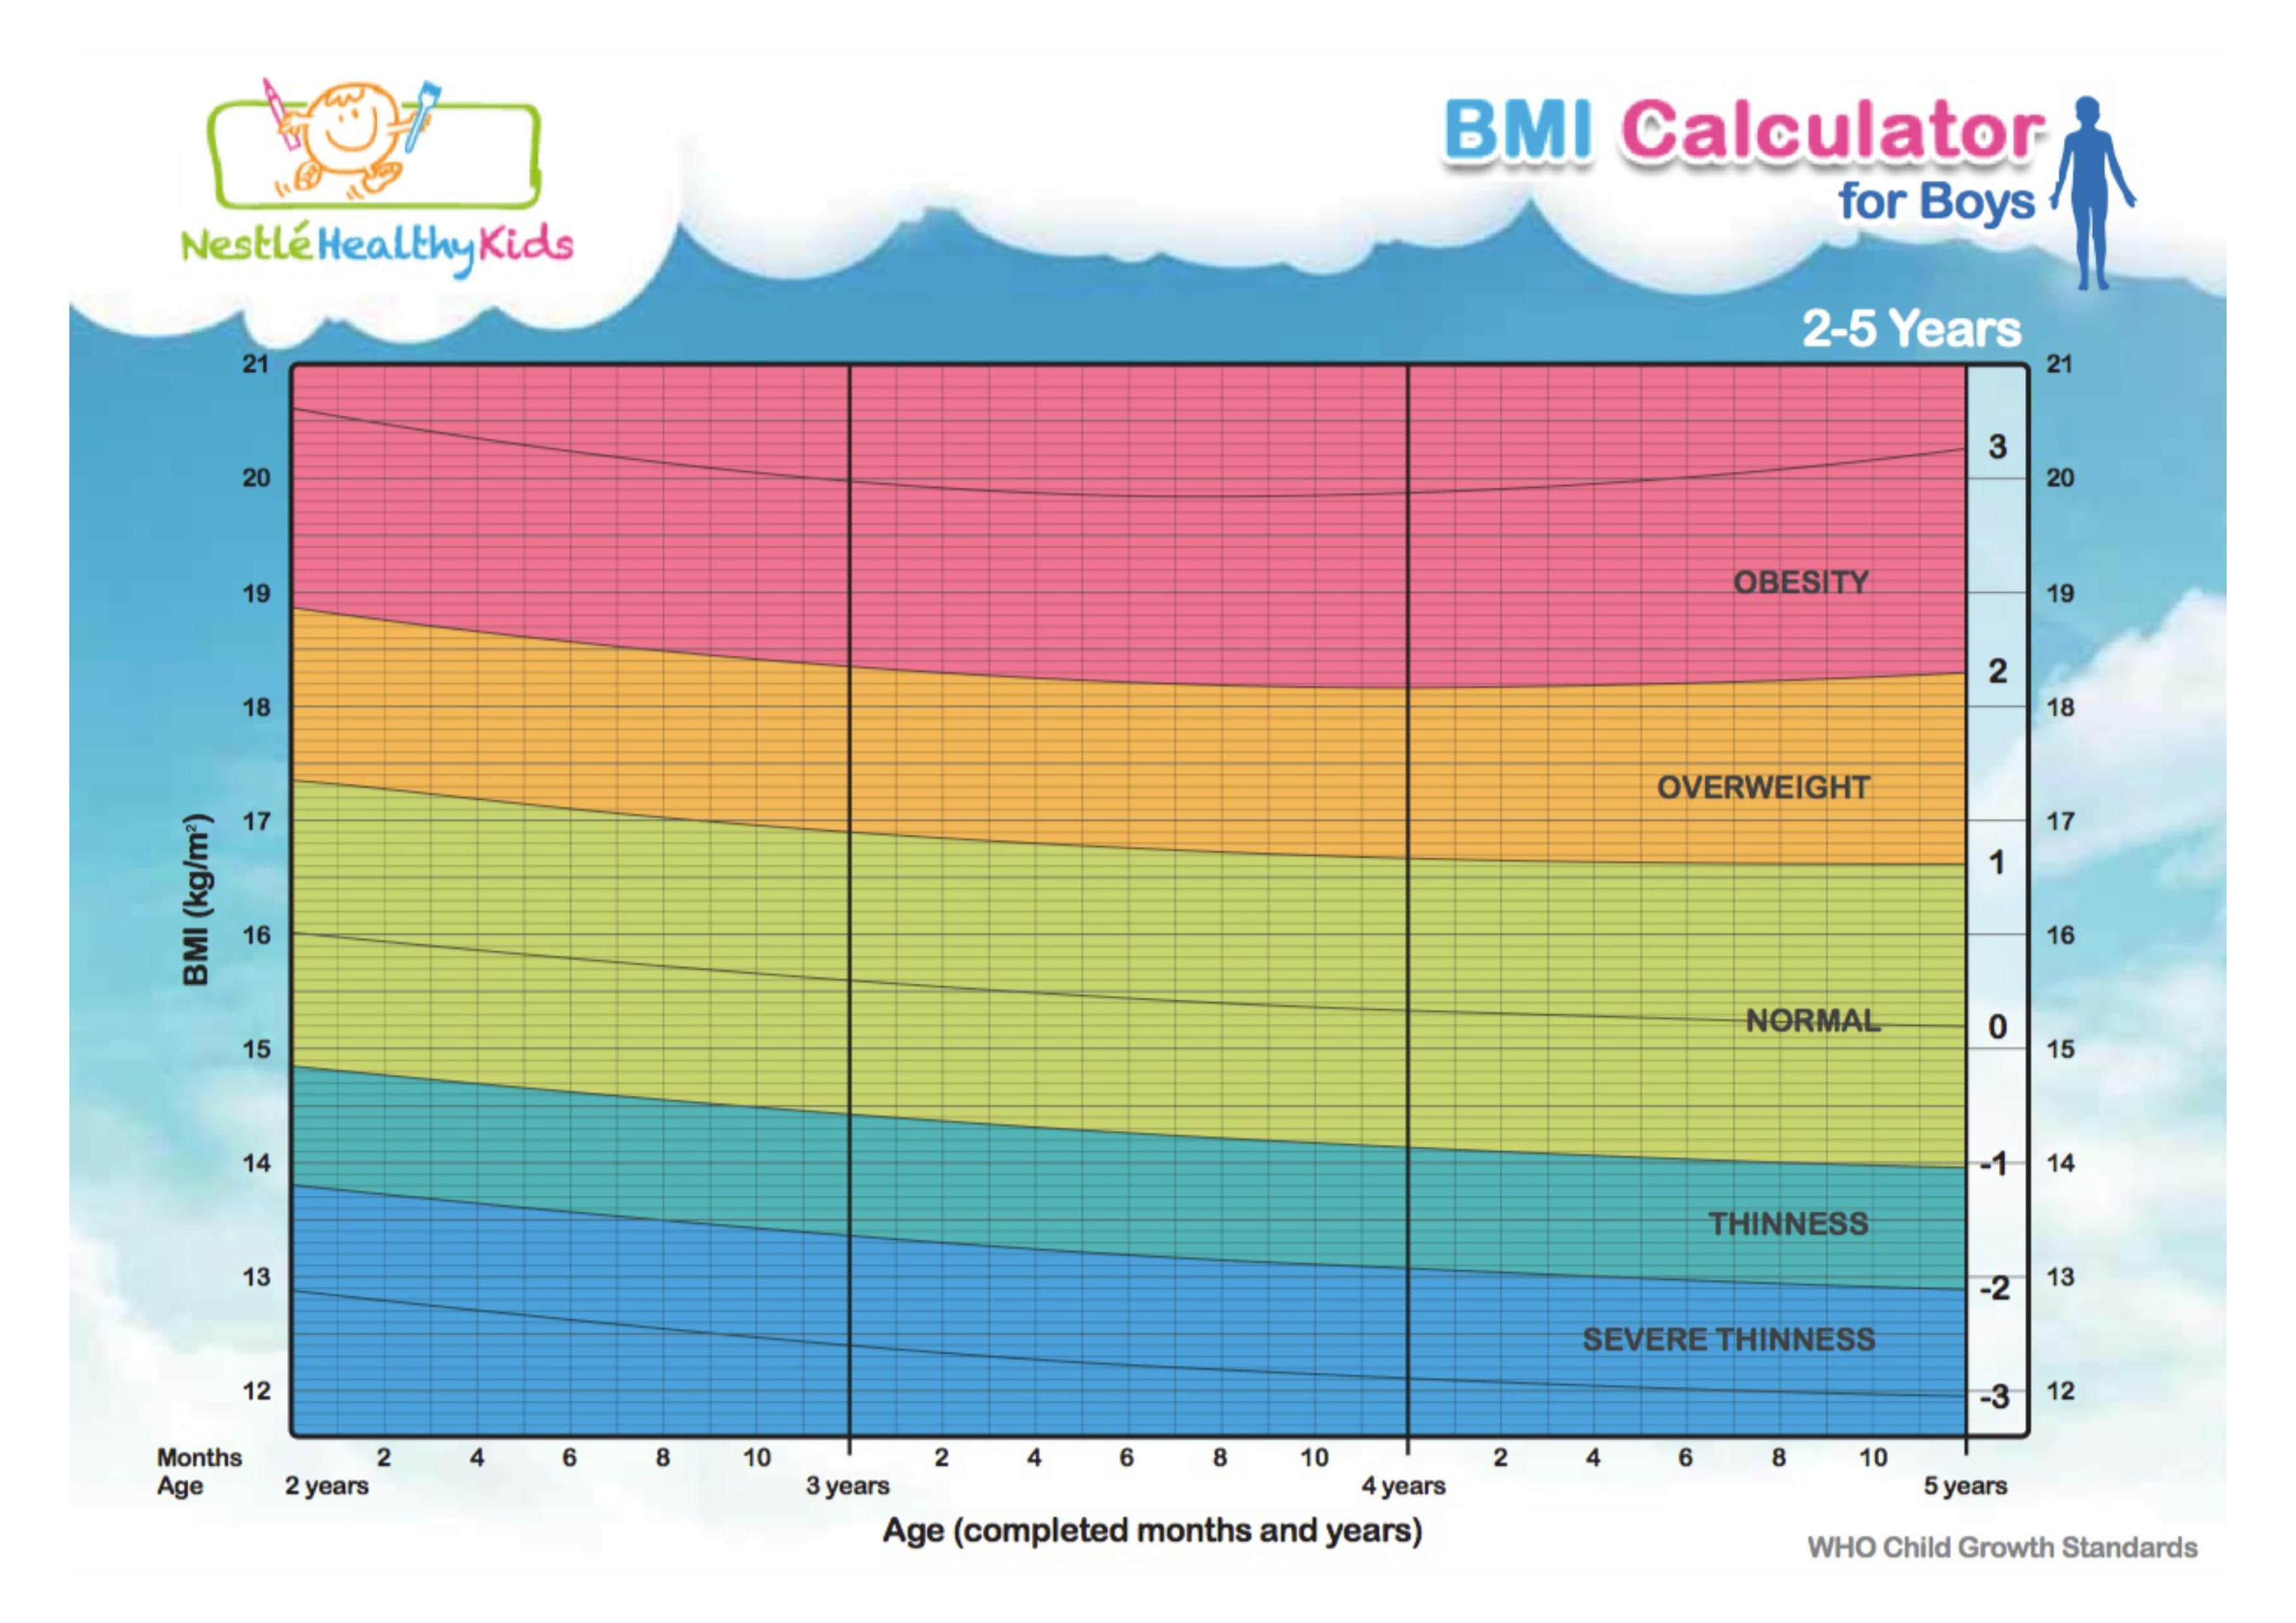 BMI Chart for boys 2-5 years old